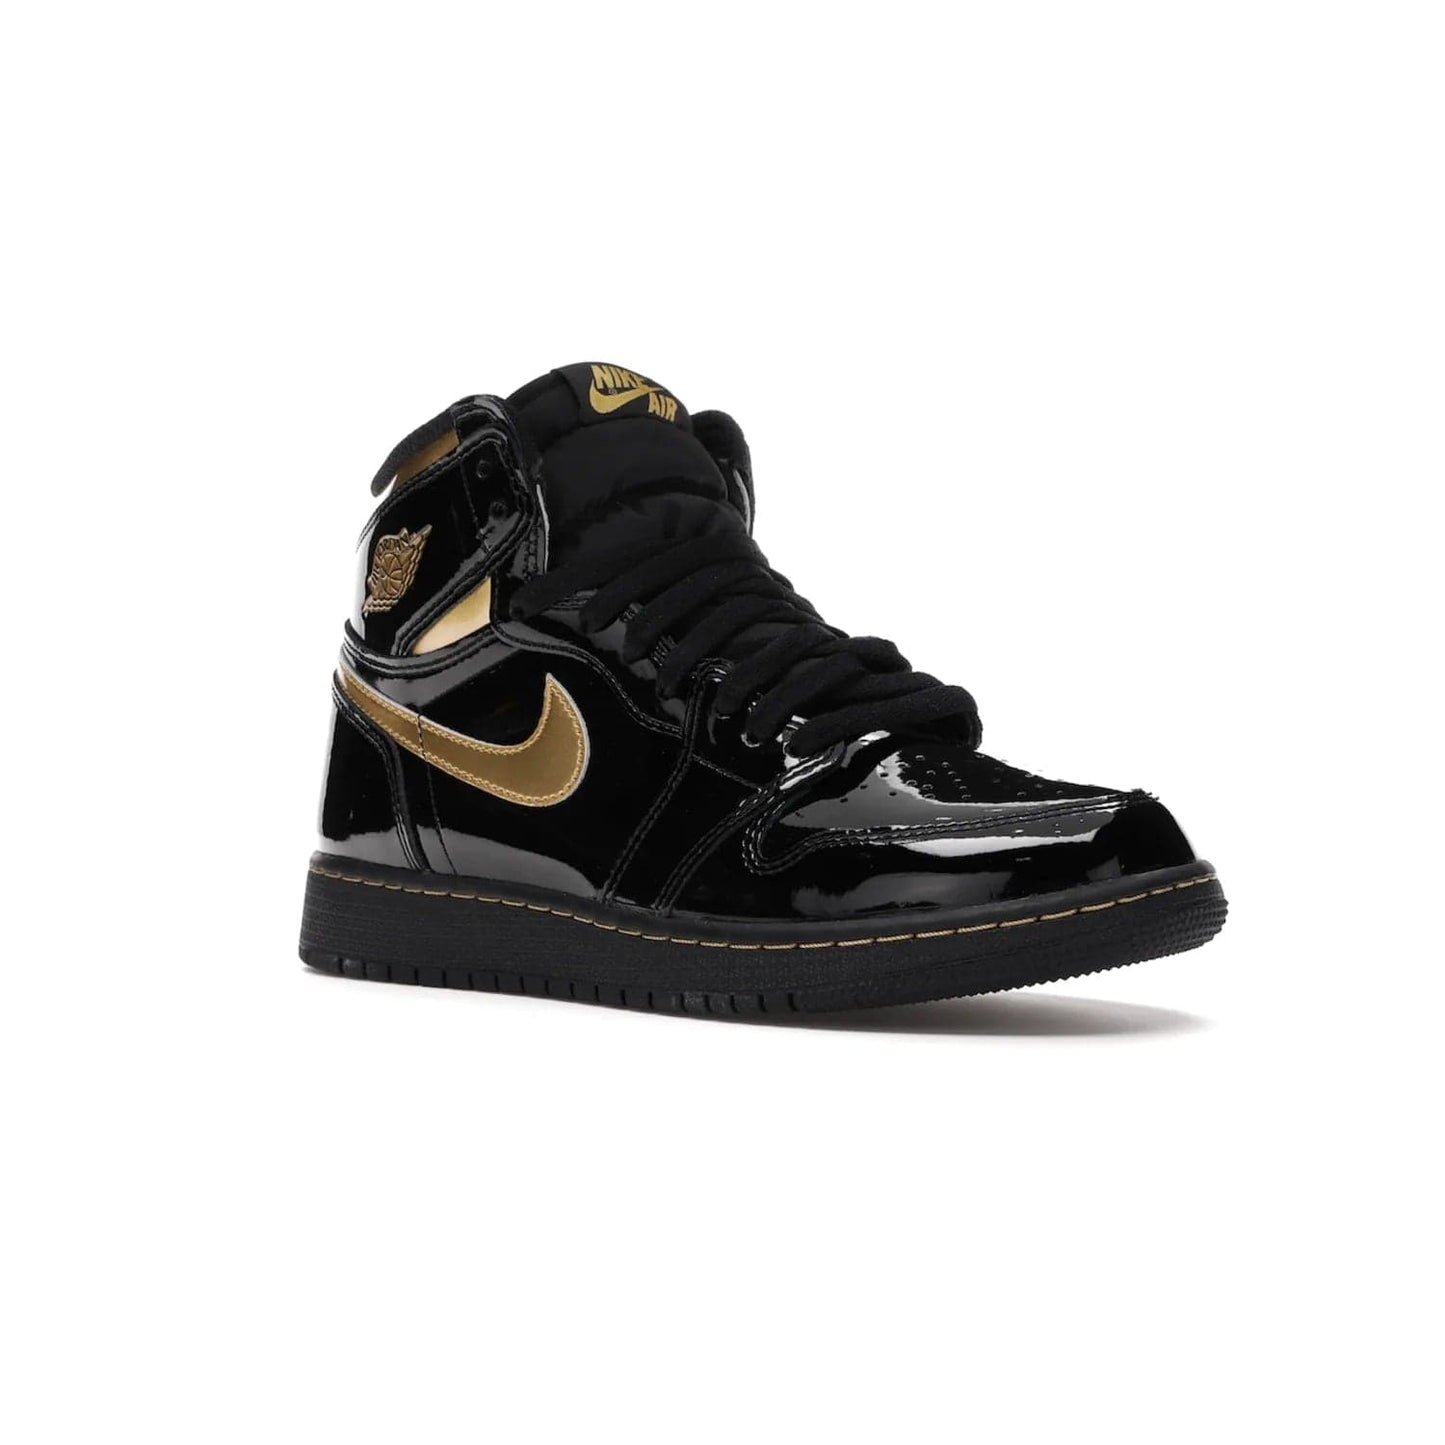 Jordan 1 Retro High Black Metallic Gold (2020) (GS) - Image 5 - Only at www.BallersClubKickz.com - Shop the Kids Air Jordan 1 Retro High in Black Metallic Gold for a stylish and comfortable sneaker kids can love. Featuring black and metallic gold patent leather uppers, metallic gold accents, and an Air sole unit for extra cushioning.